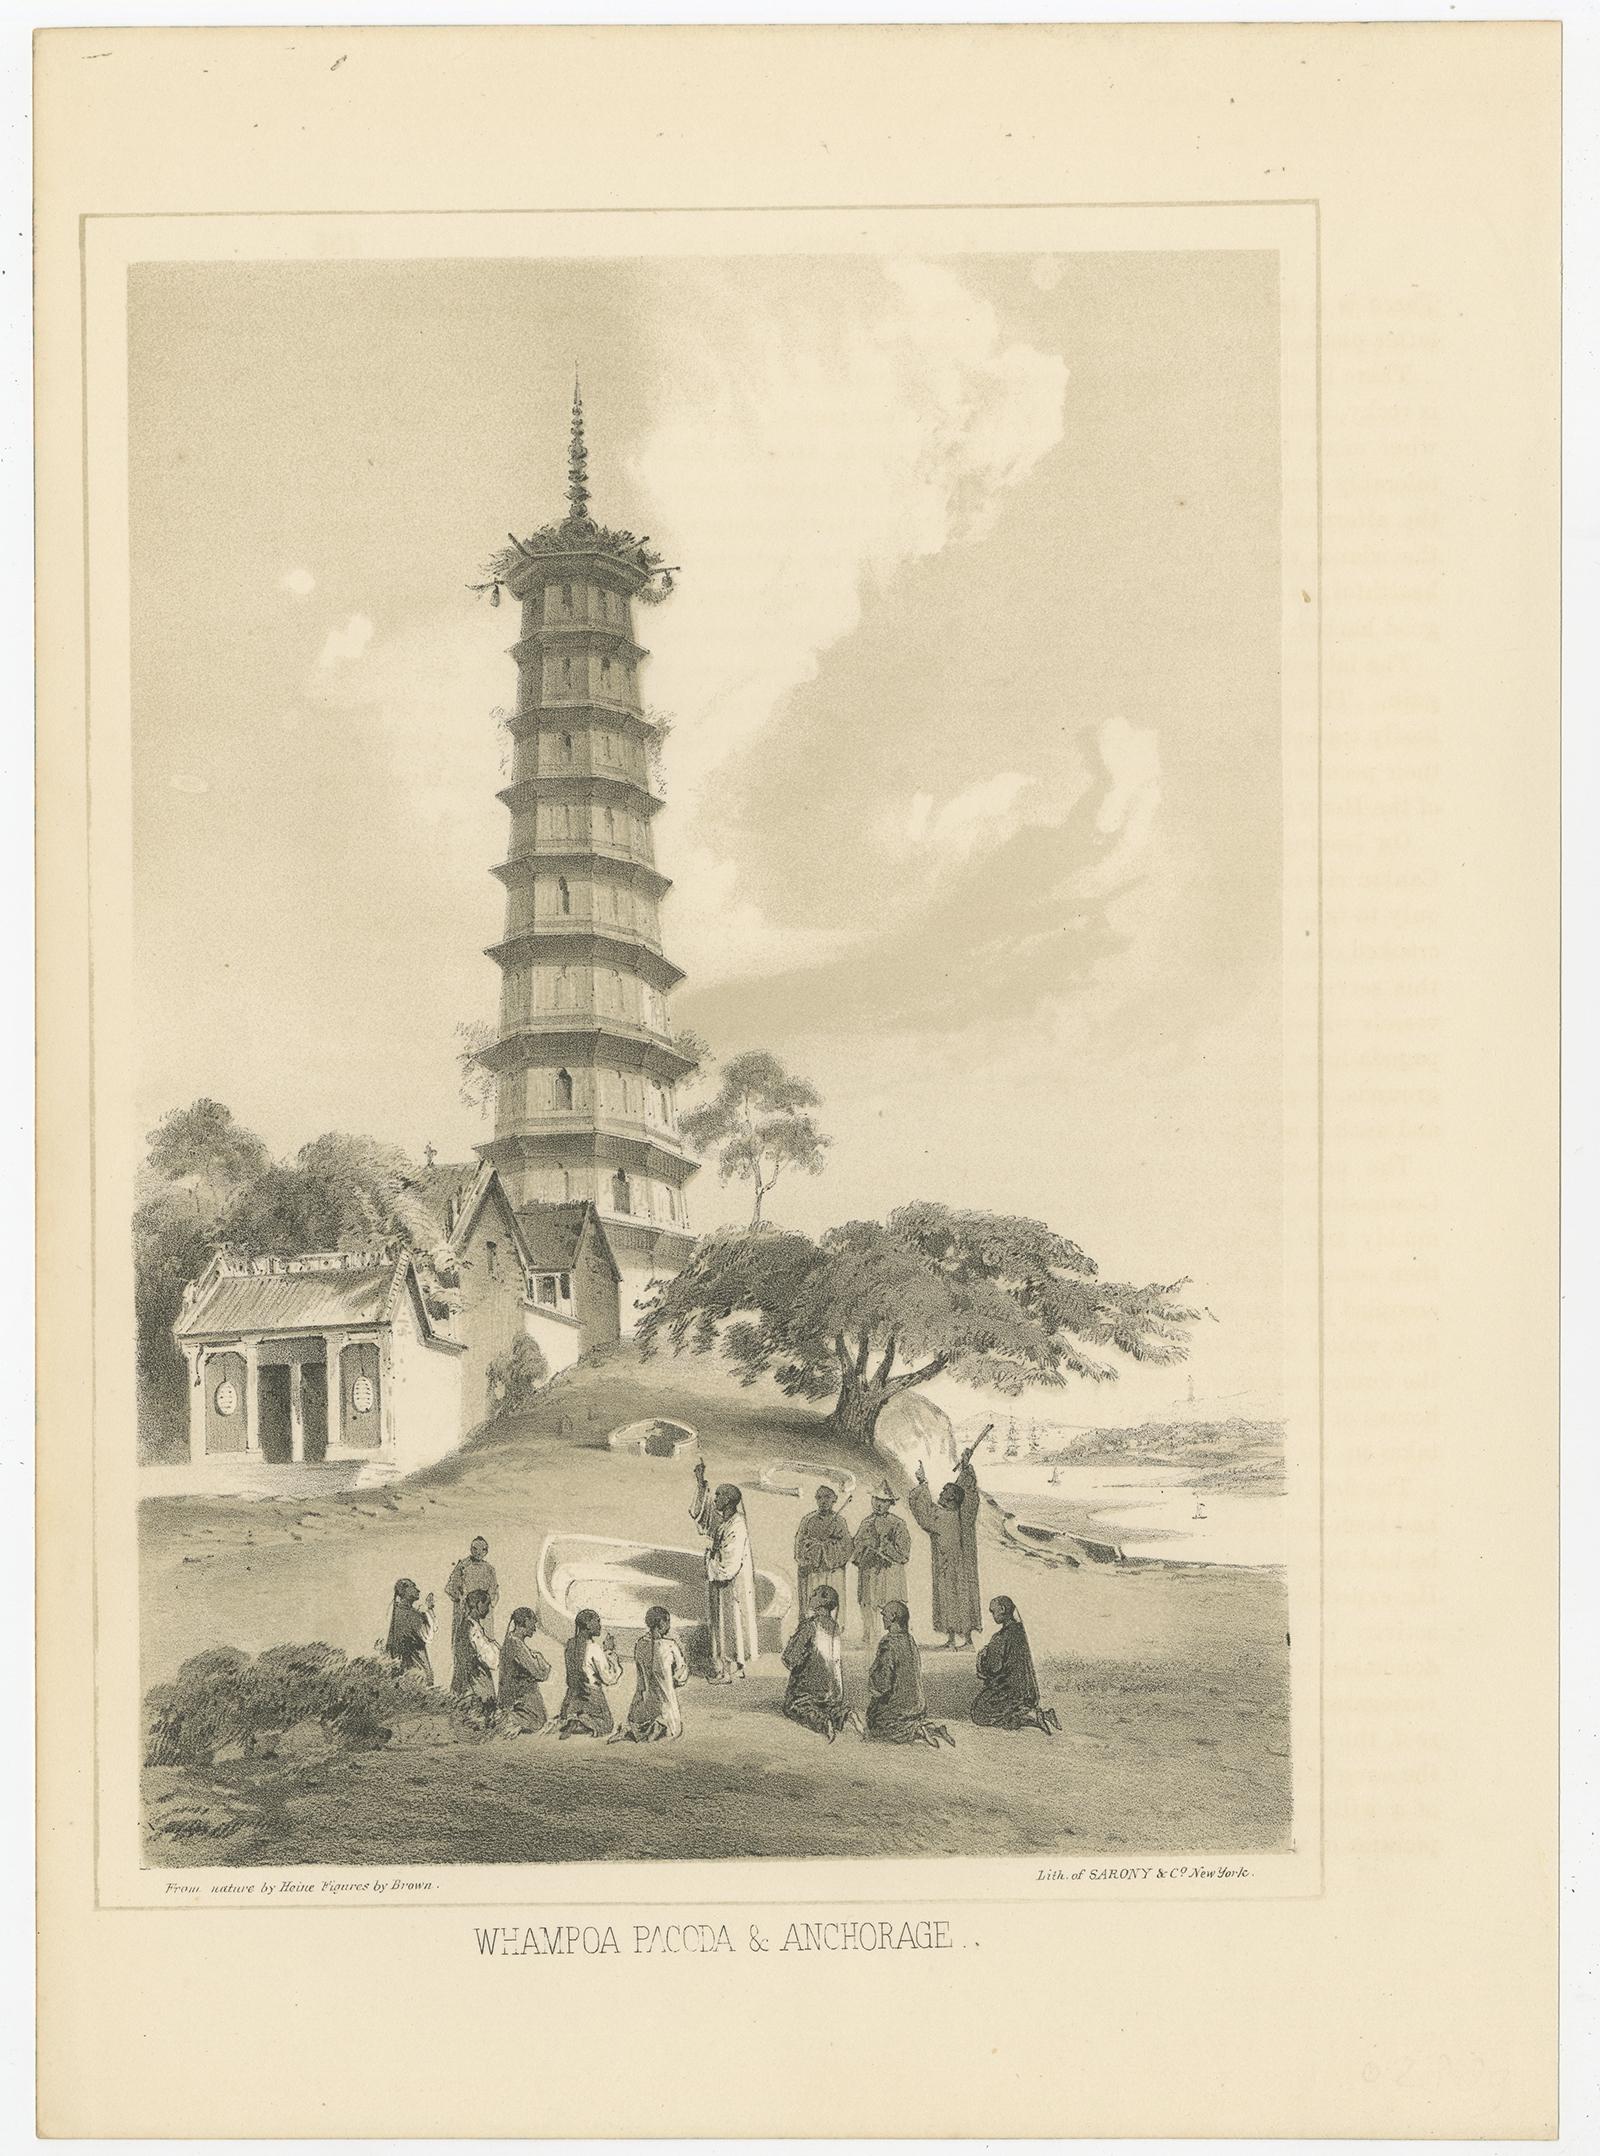 Description: Antique print titled ‘Whampoa Pagoda & Anchorage'. 

View of the Pazhou Pagoda. The Pazhou Pagoda, also known as the Whampoa Pagoda or Pa Chow Pogoda, is an ancient Chinese pagoda on Pazhou Island in Haizhu District, Guangzhou, the